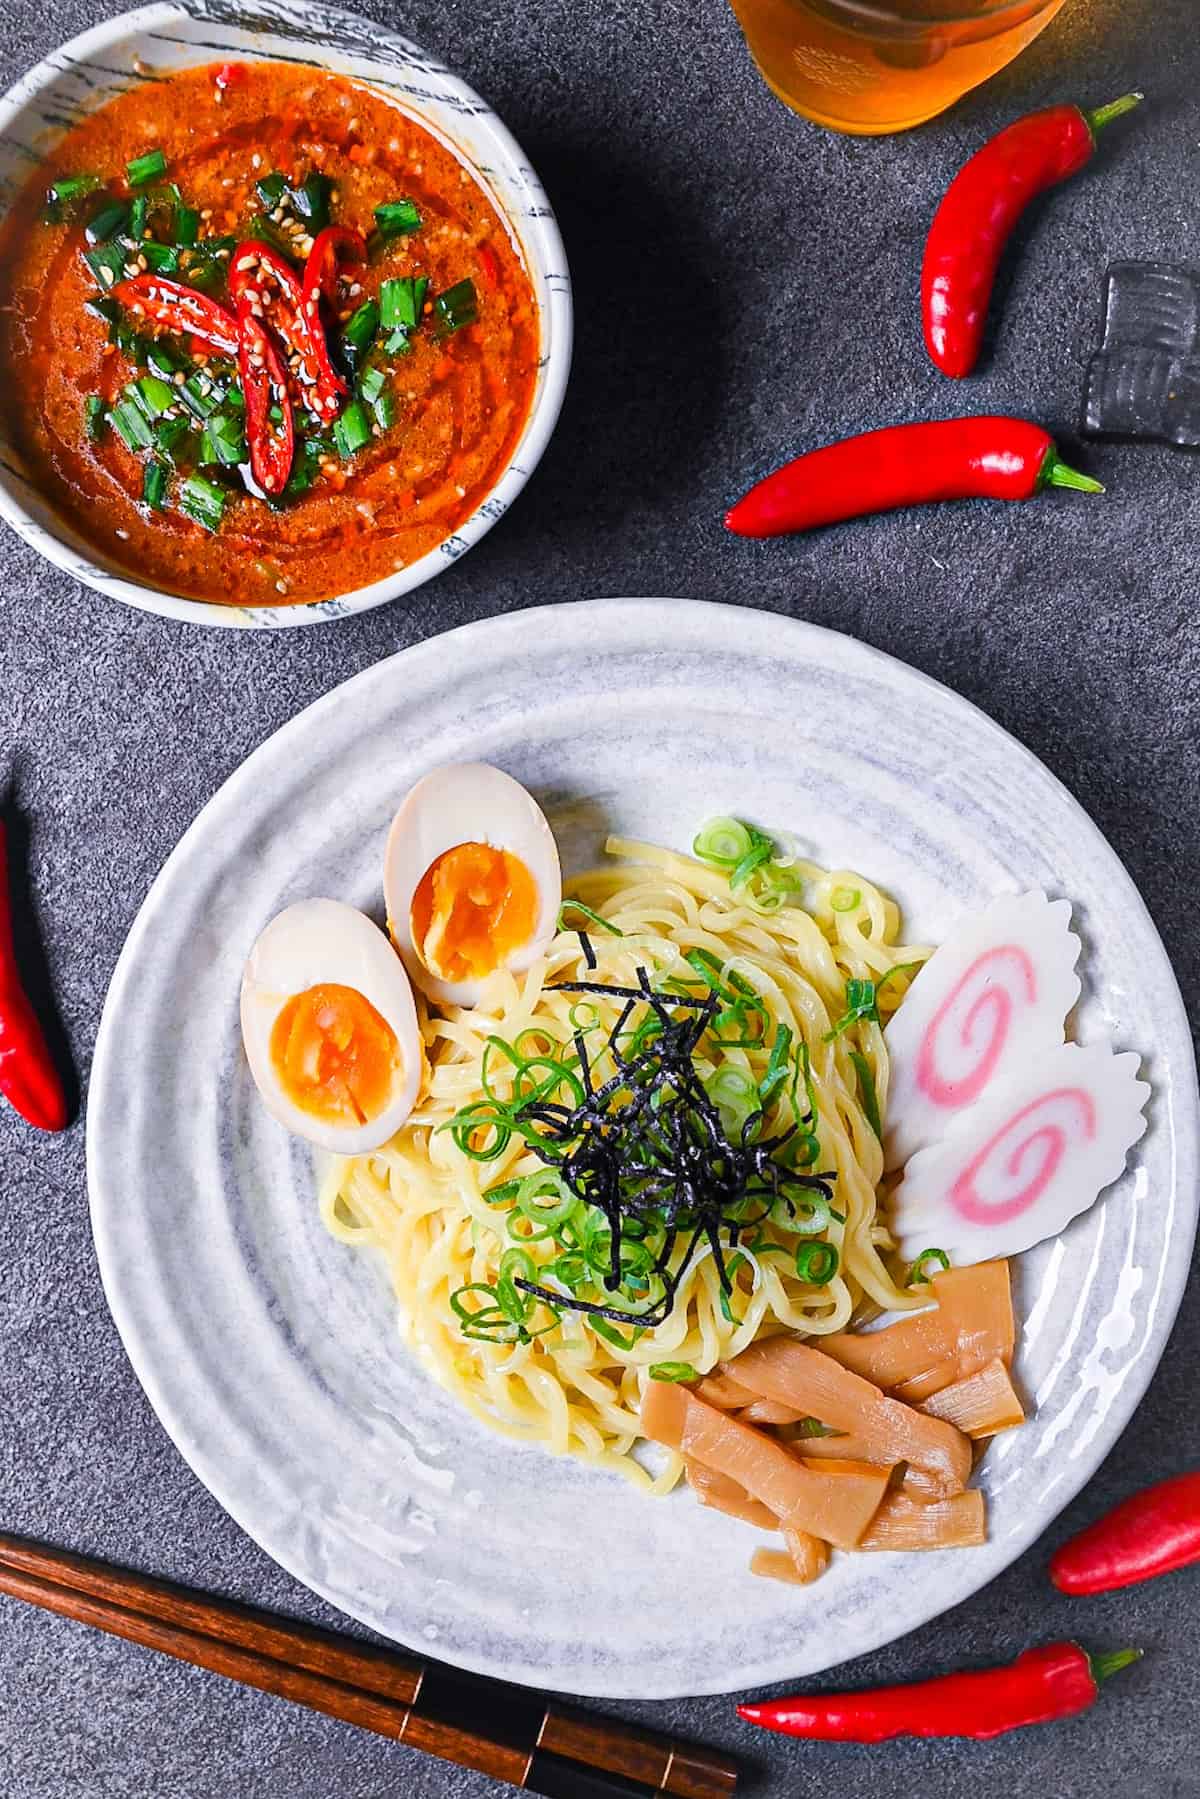 Japanese ramen noodles on a white plate with menma, narutomaki and ramen eggs served next to a bowl of spicy tsukemen soup